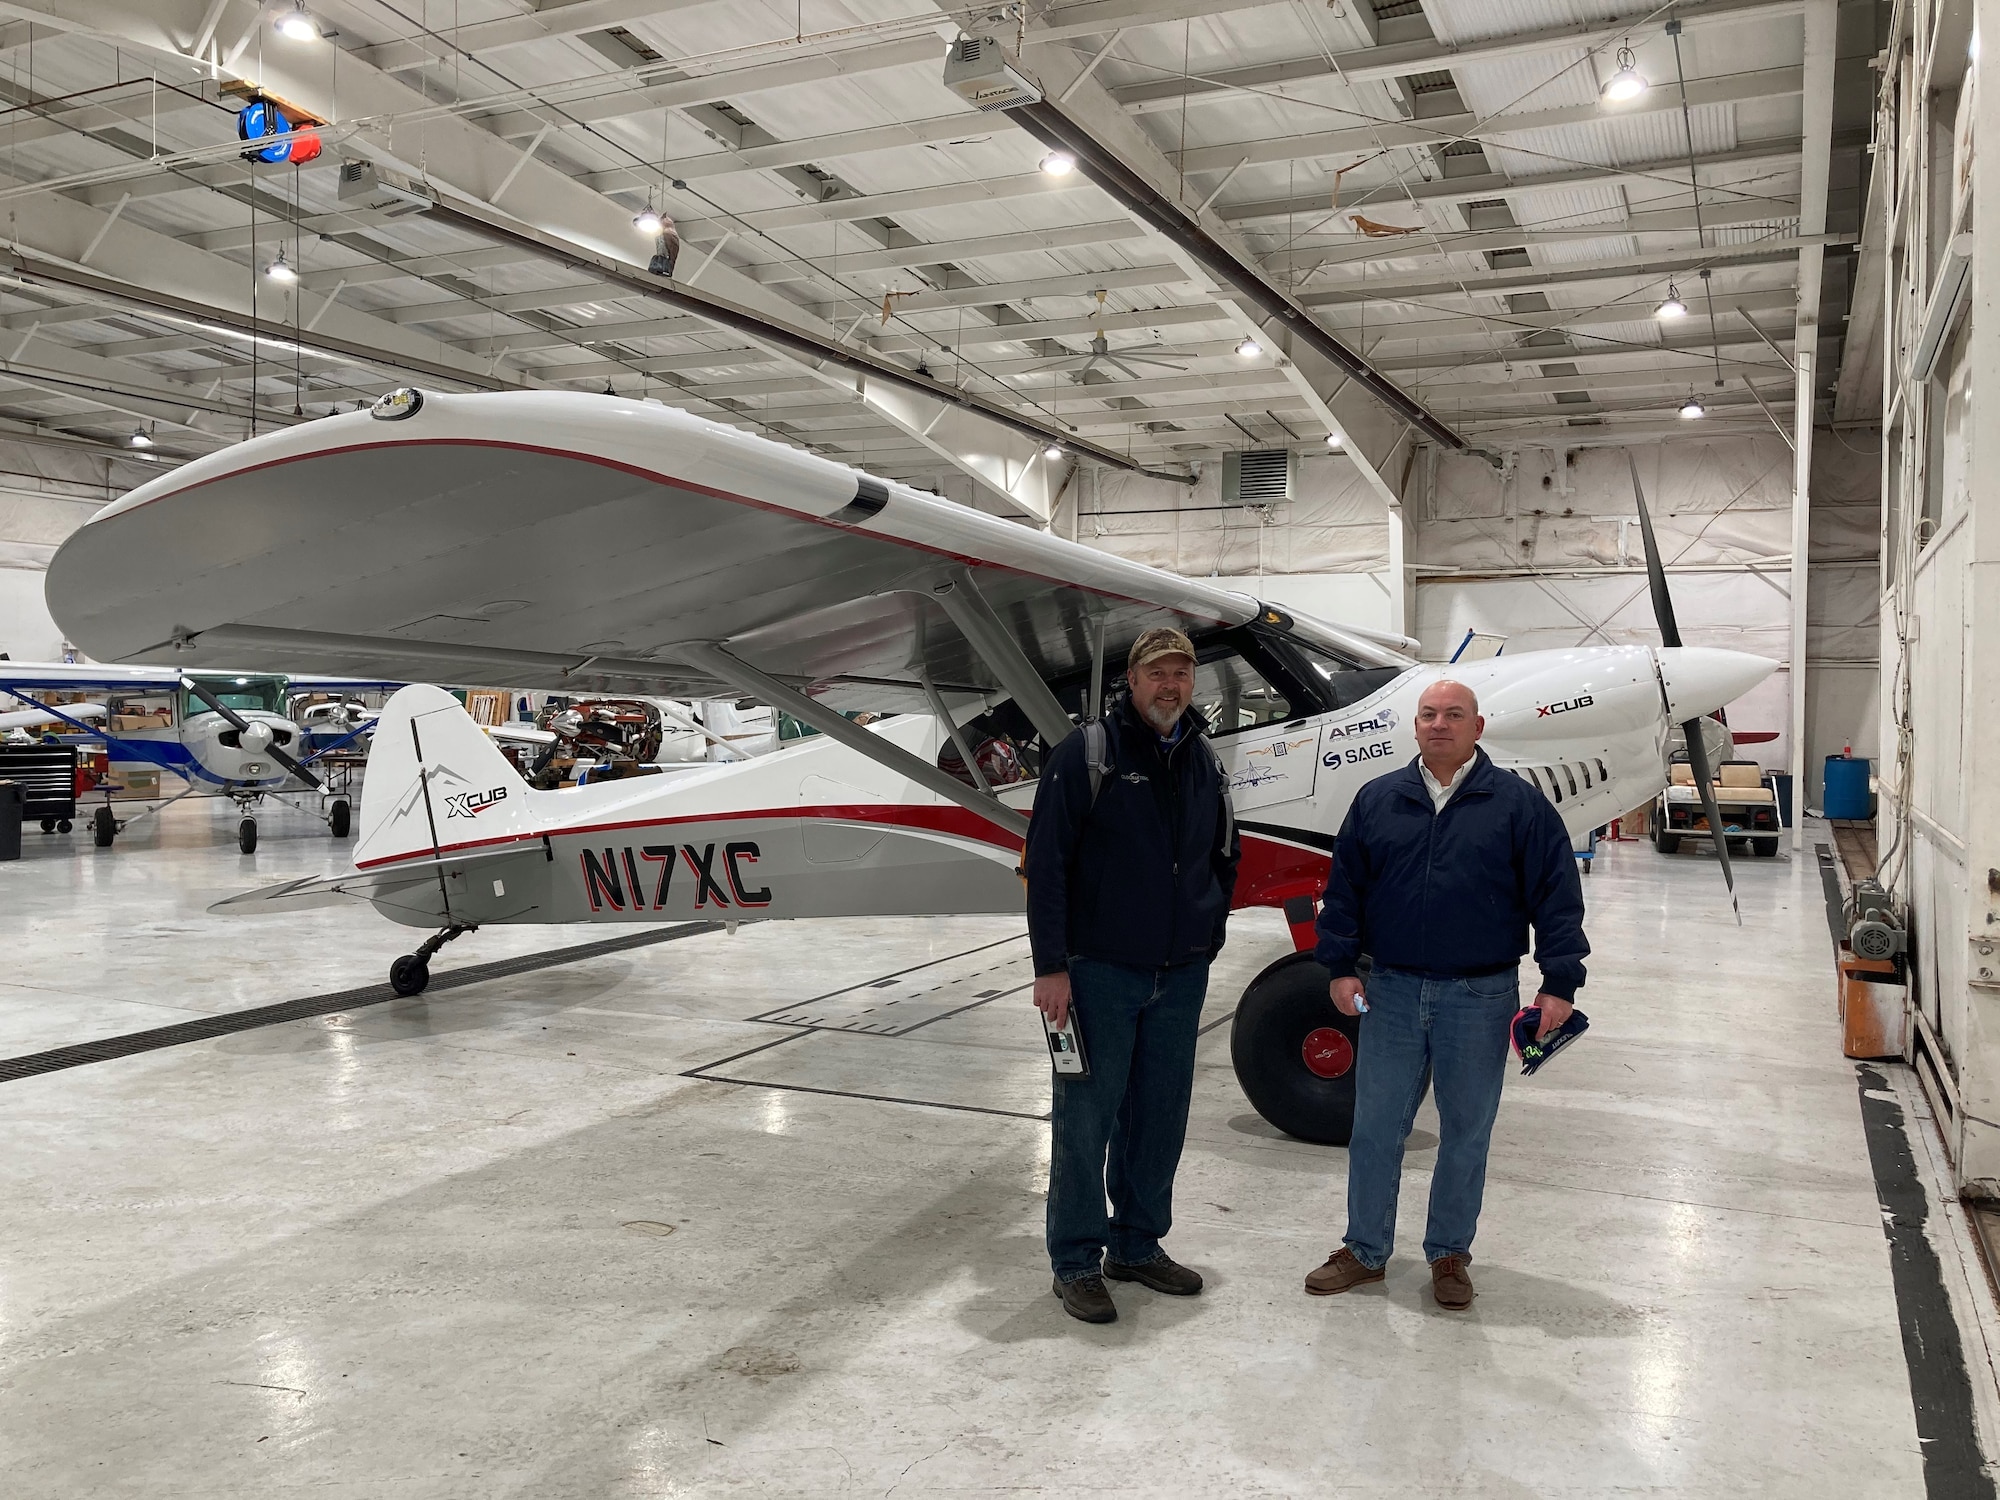 CubCrafters pilot Mark Keneston (left) and Air Force Research Laboratory pilot Dr. Eric Geiselman are pictured next to AFRL LASH Lysander XCub at the Lewis A. Jackson Regional Airport in Greene County, Ohio, on Dec. 21, 2020. The aircraft made a brief stop before traveling on to the AFRL 711th Human Performance Wing’s contracted research flight test organization facility in Maryland, where it will be used to advance the initial “Lysander” personnel recovery flight experiments. (U.S. Air Force photo/Dr. Darrel G. Hopper)